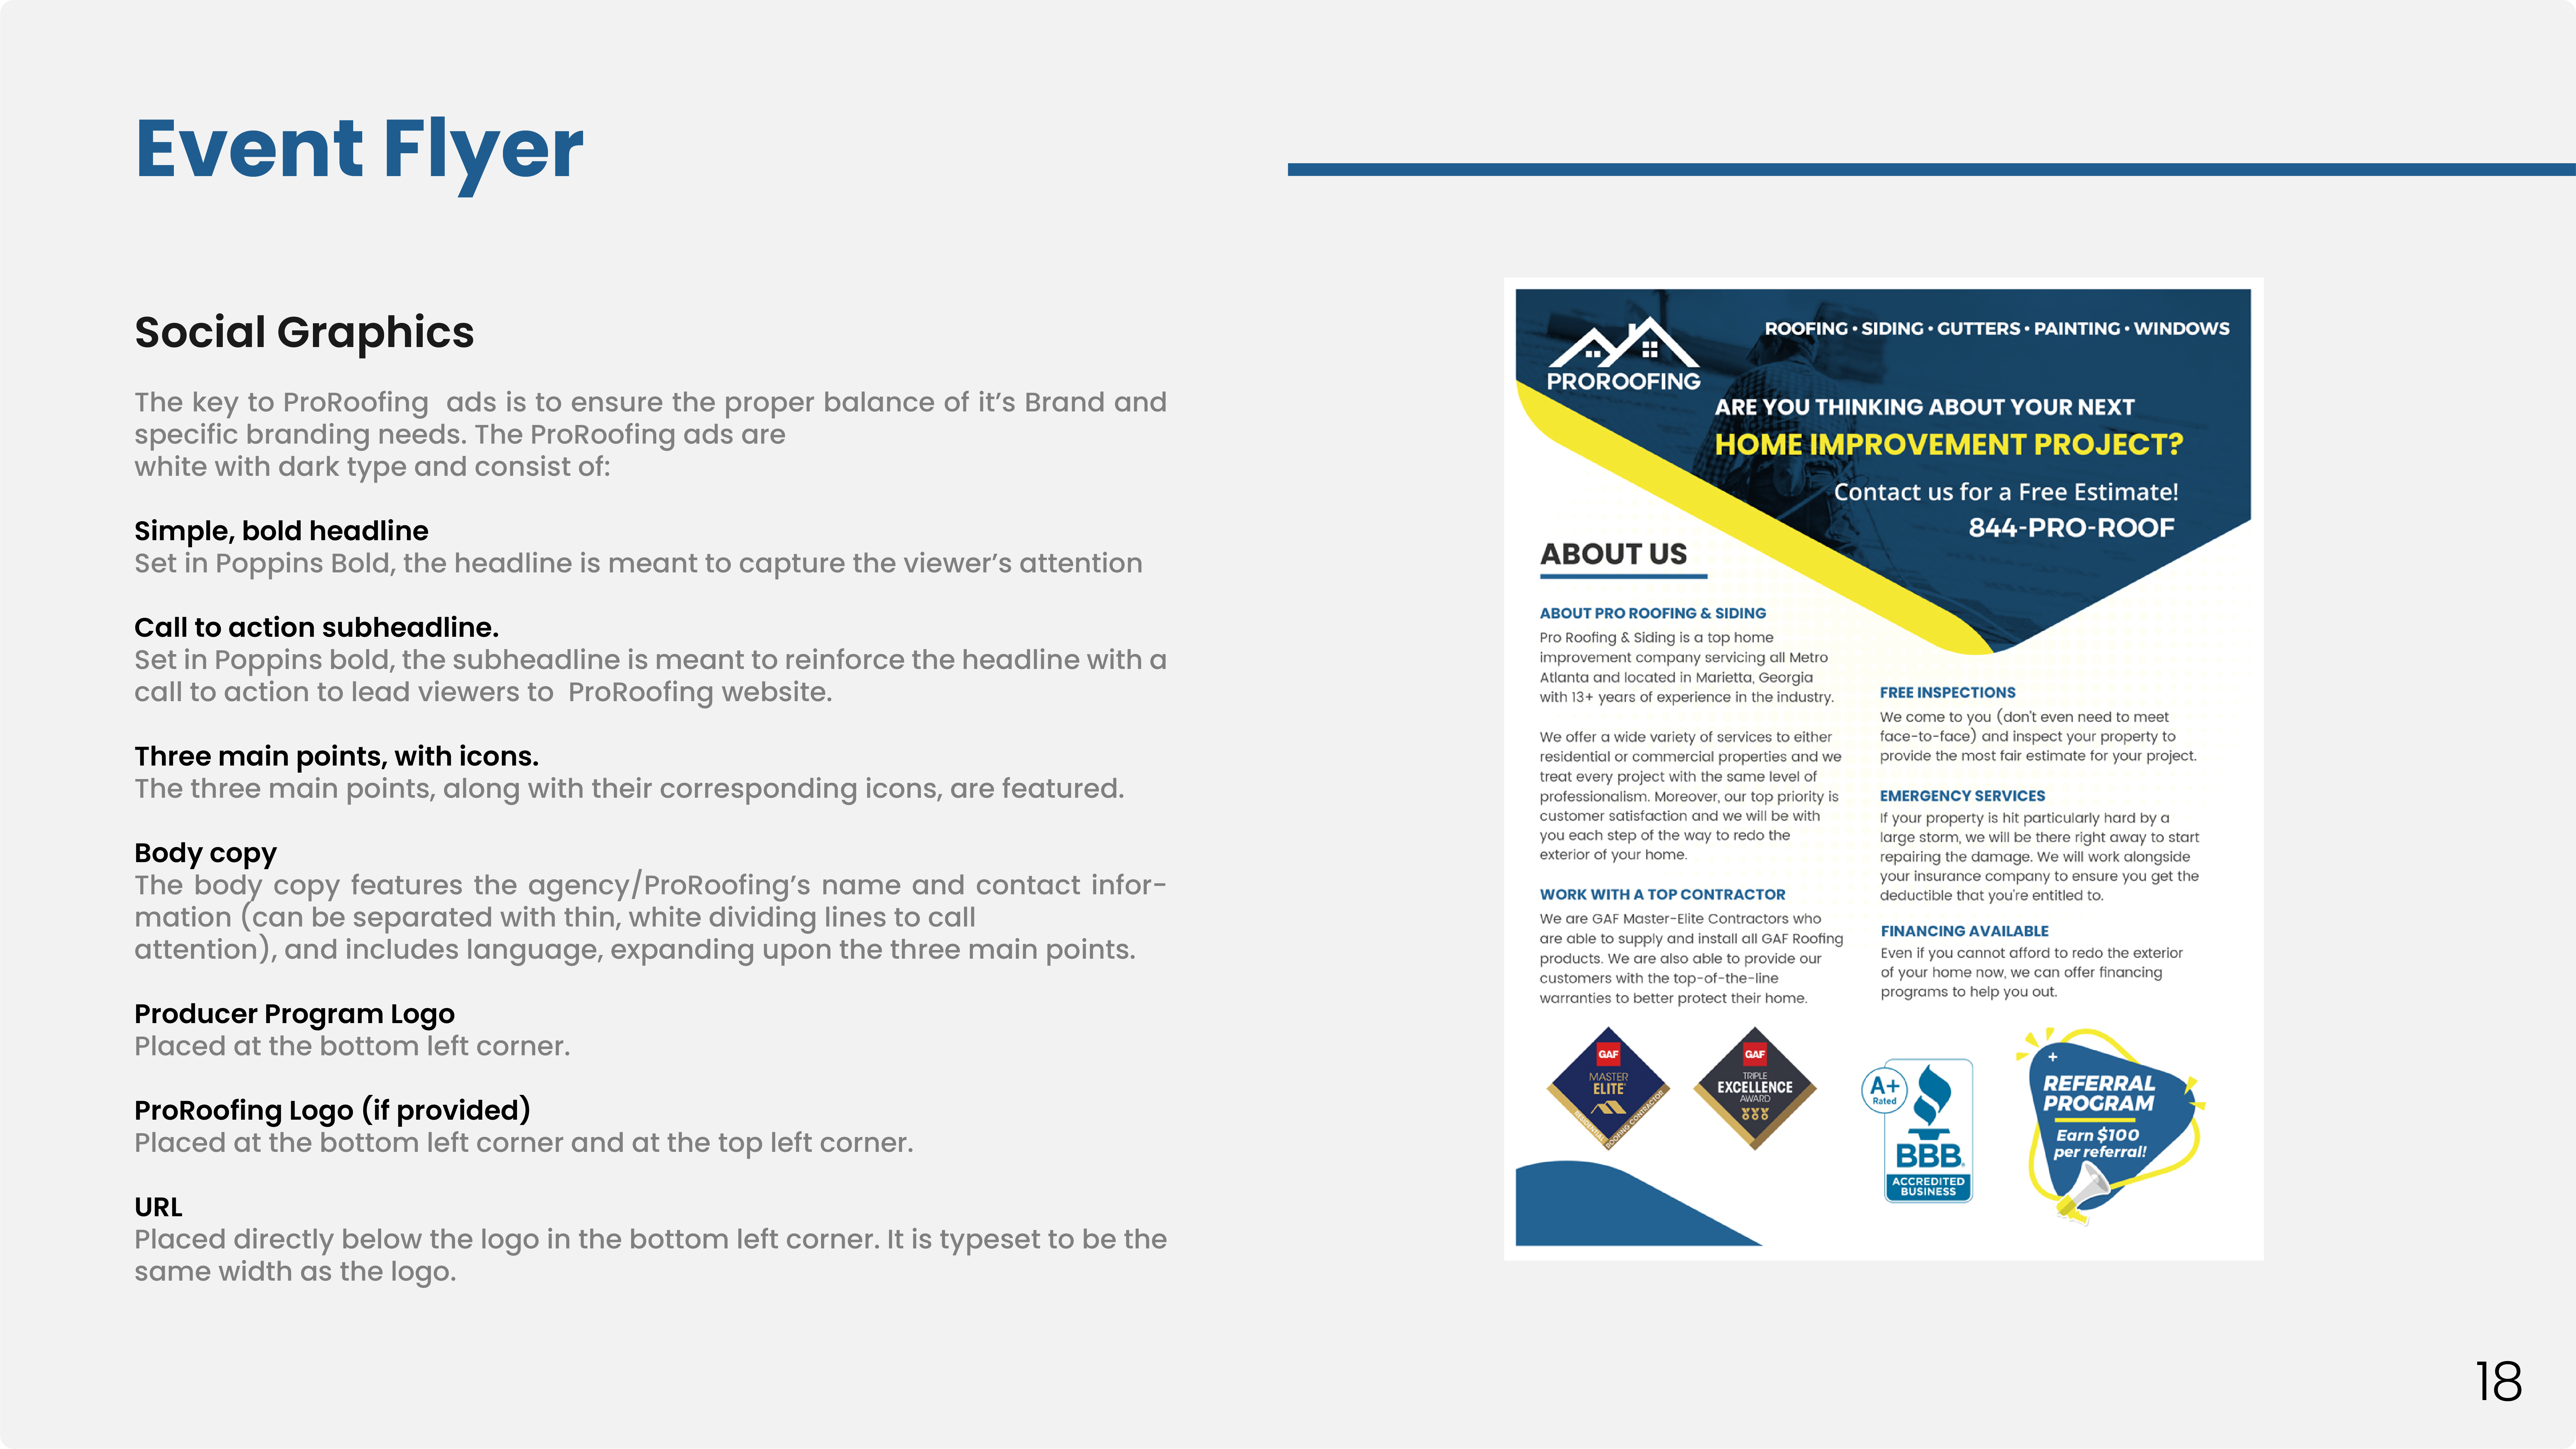 Pro Roofing - Pro roofing Brand Guidelines 20 - New Minds Group